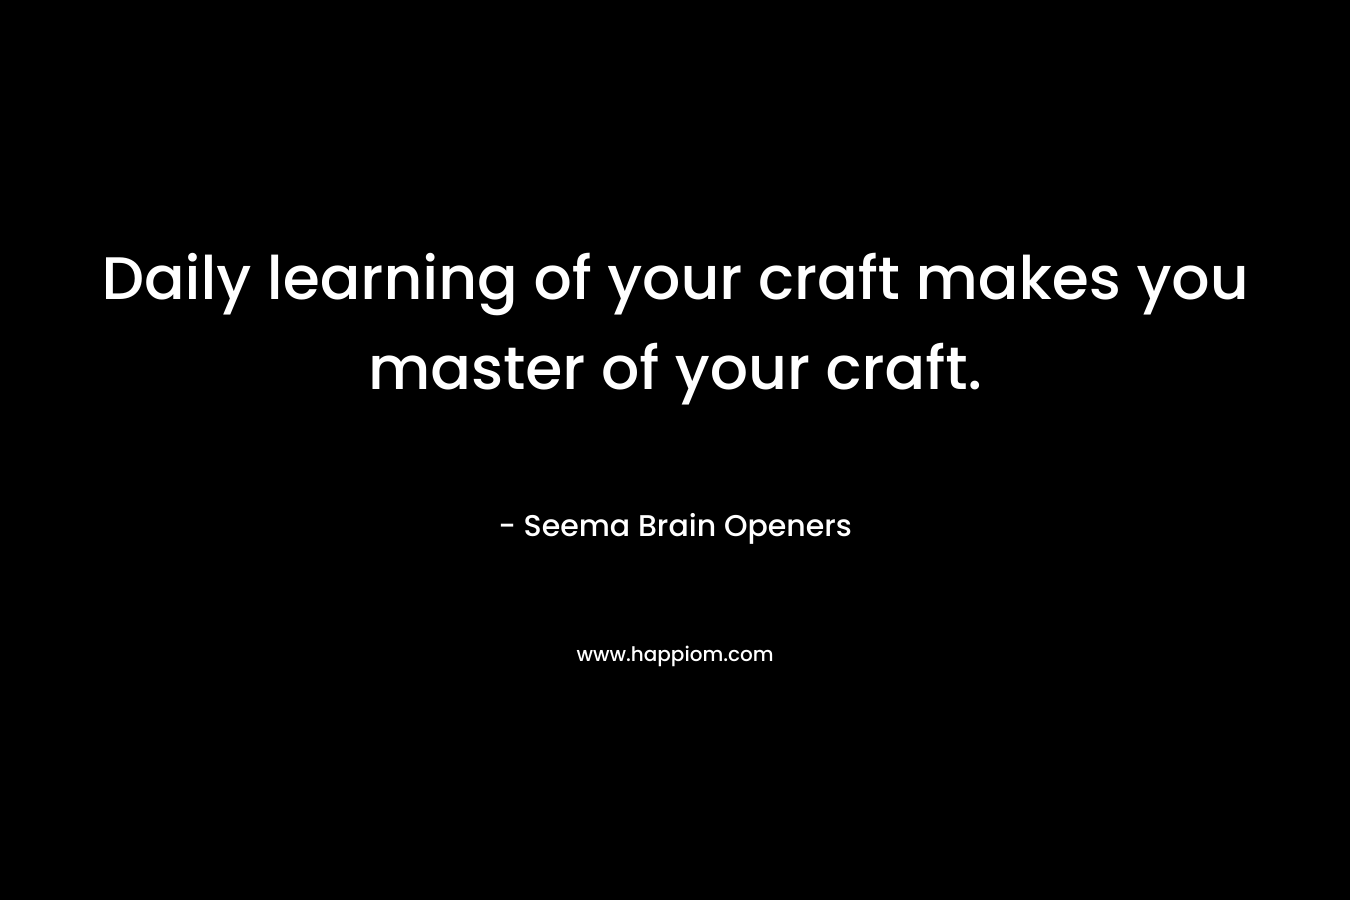 Daily learning of your craft makes you master of your craft.